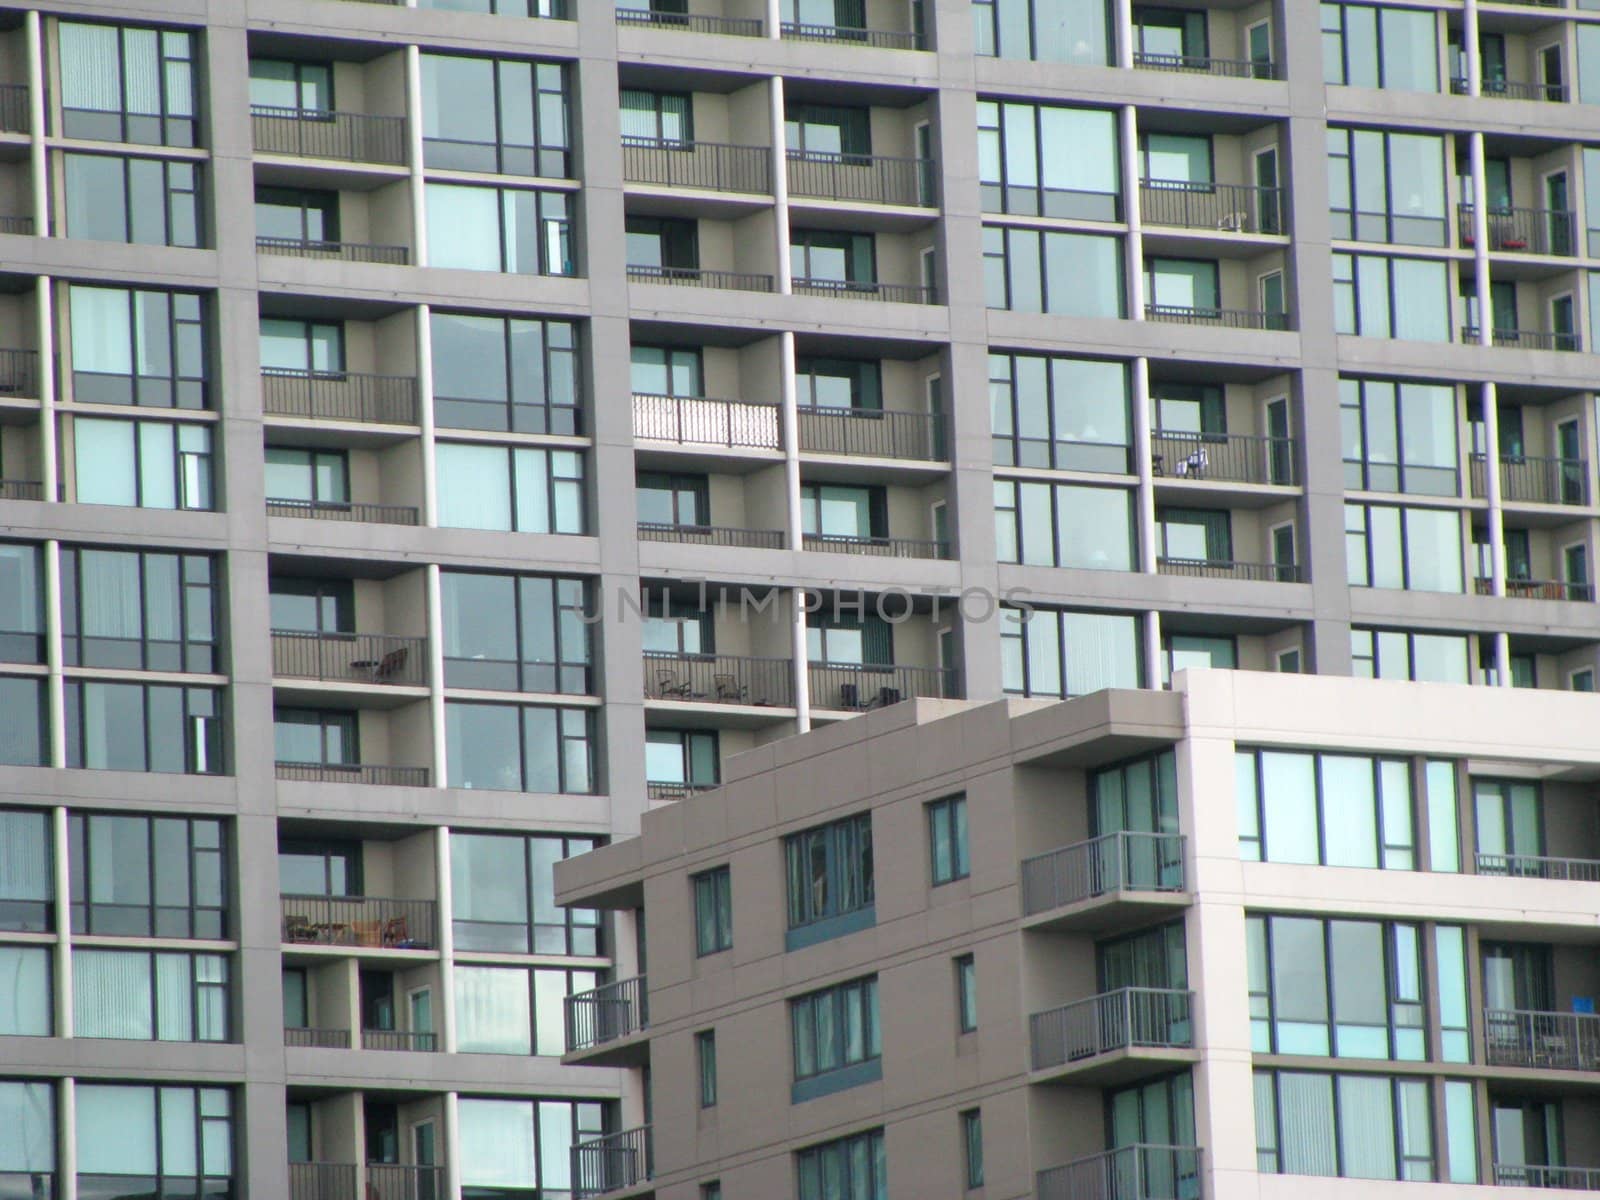 Abstract shot of a high-rise condo or apartment building with windows and balconies.